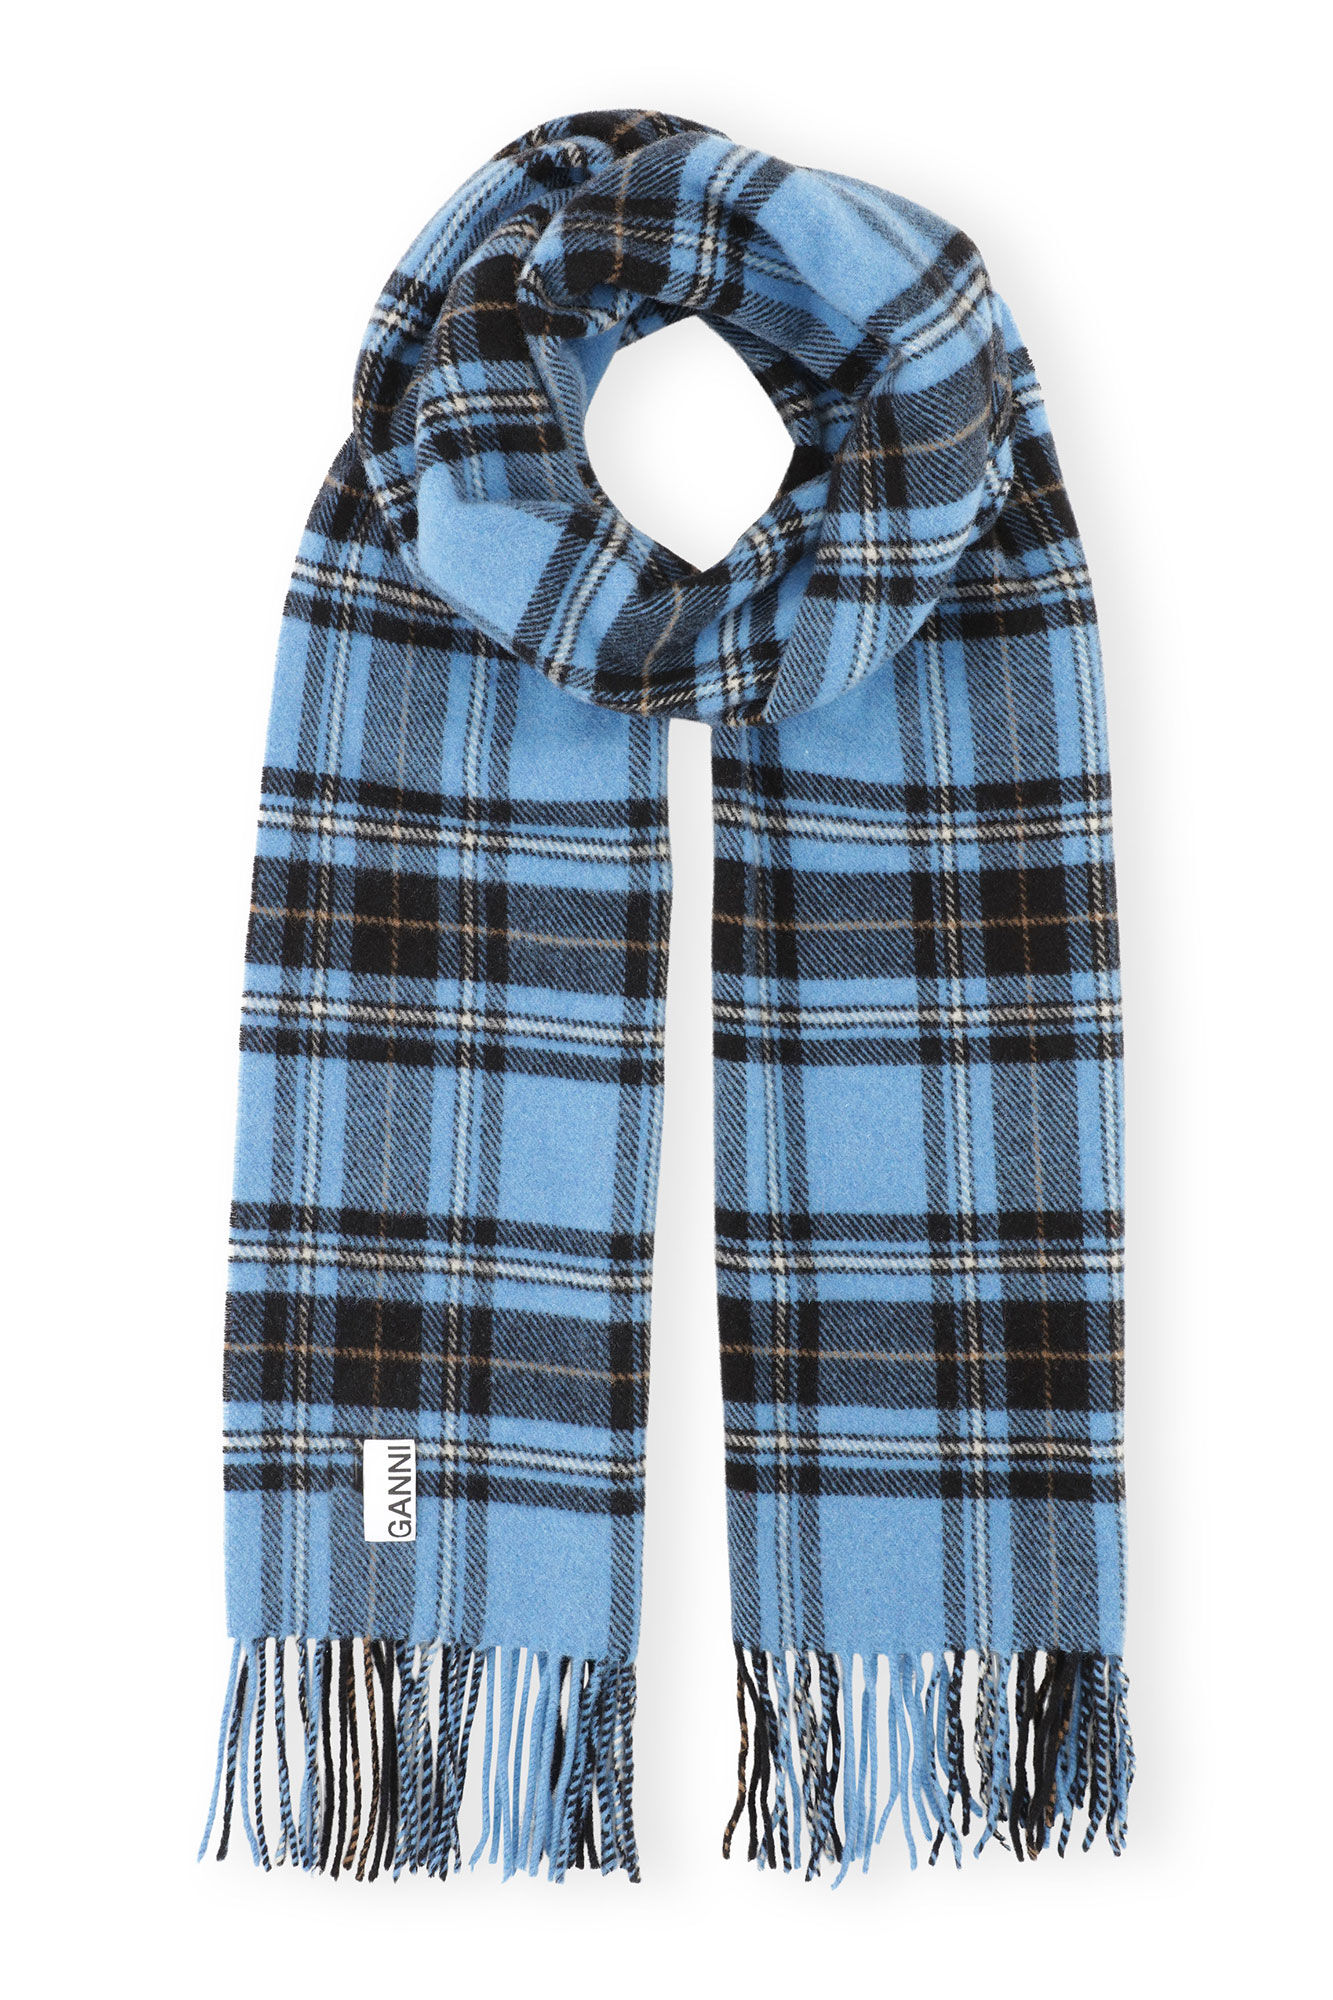 Checkered Wool Fringed Scarf